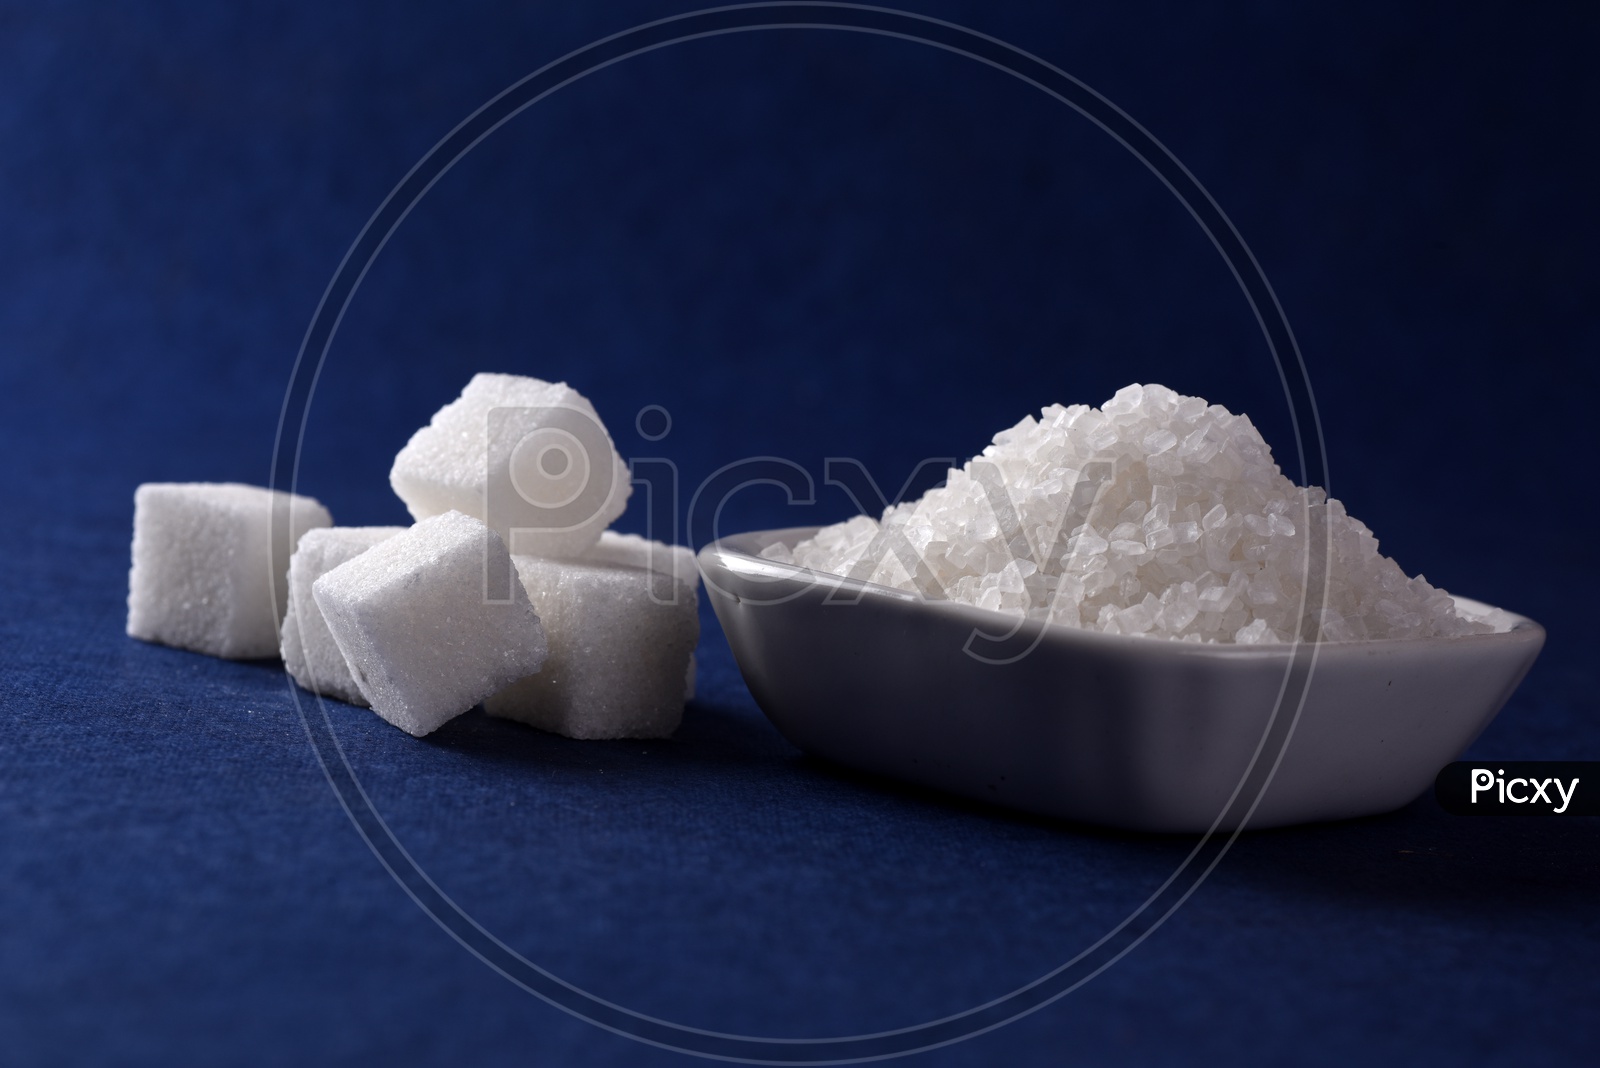 Sugar cubes and granulated sugar in a ceramic plate on blue background